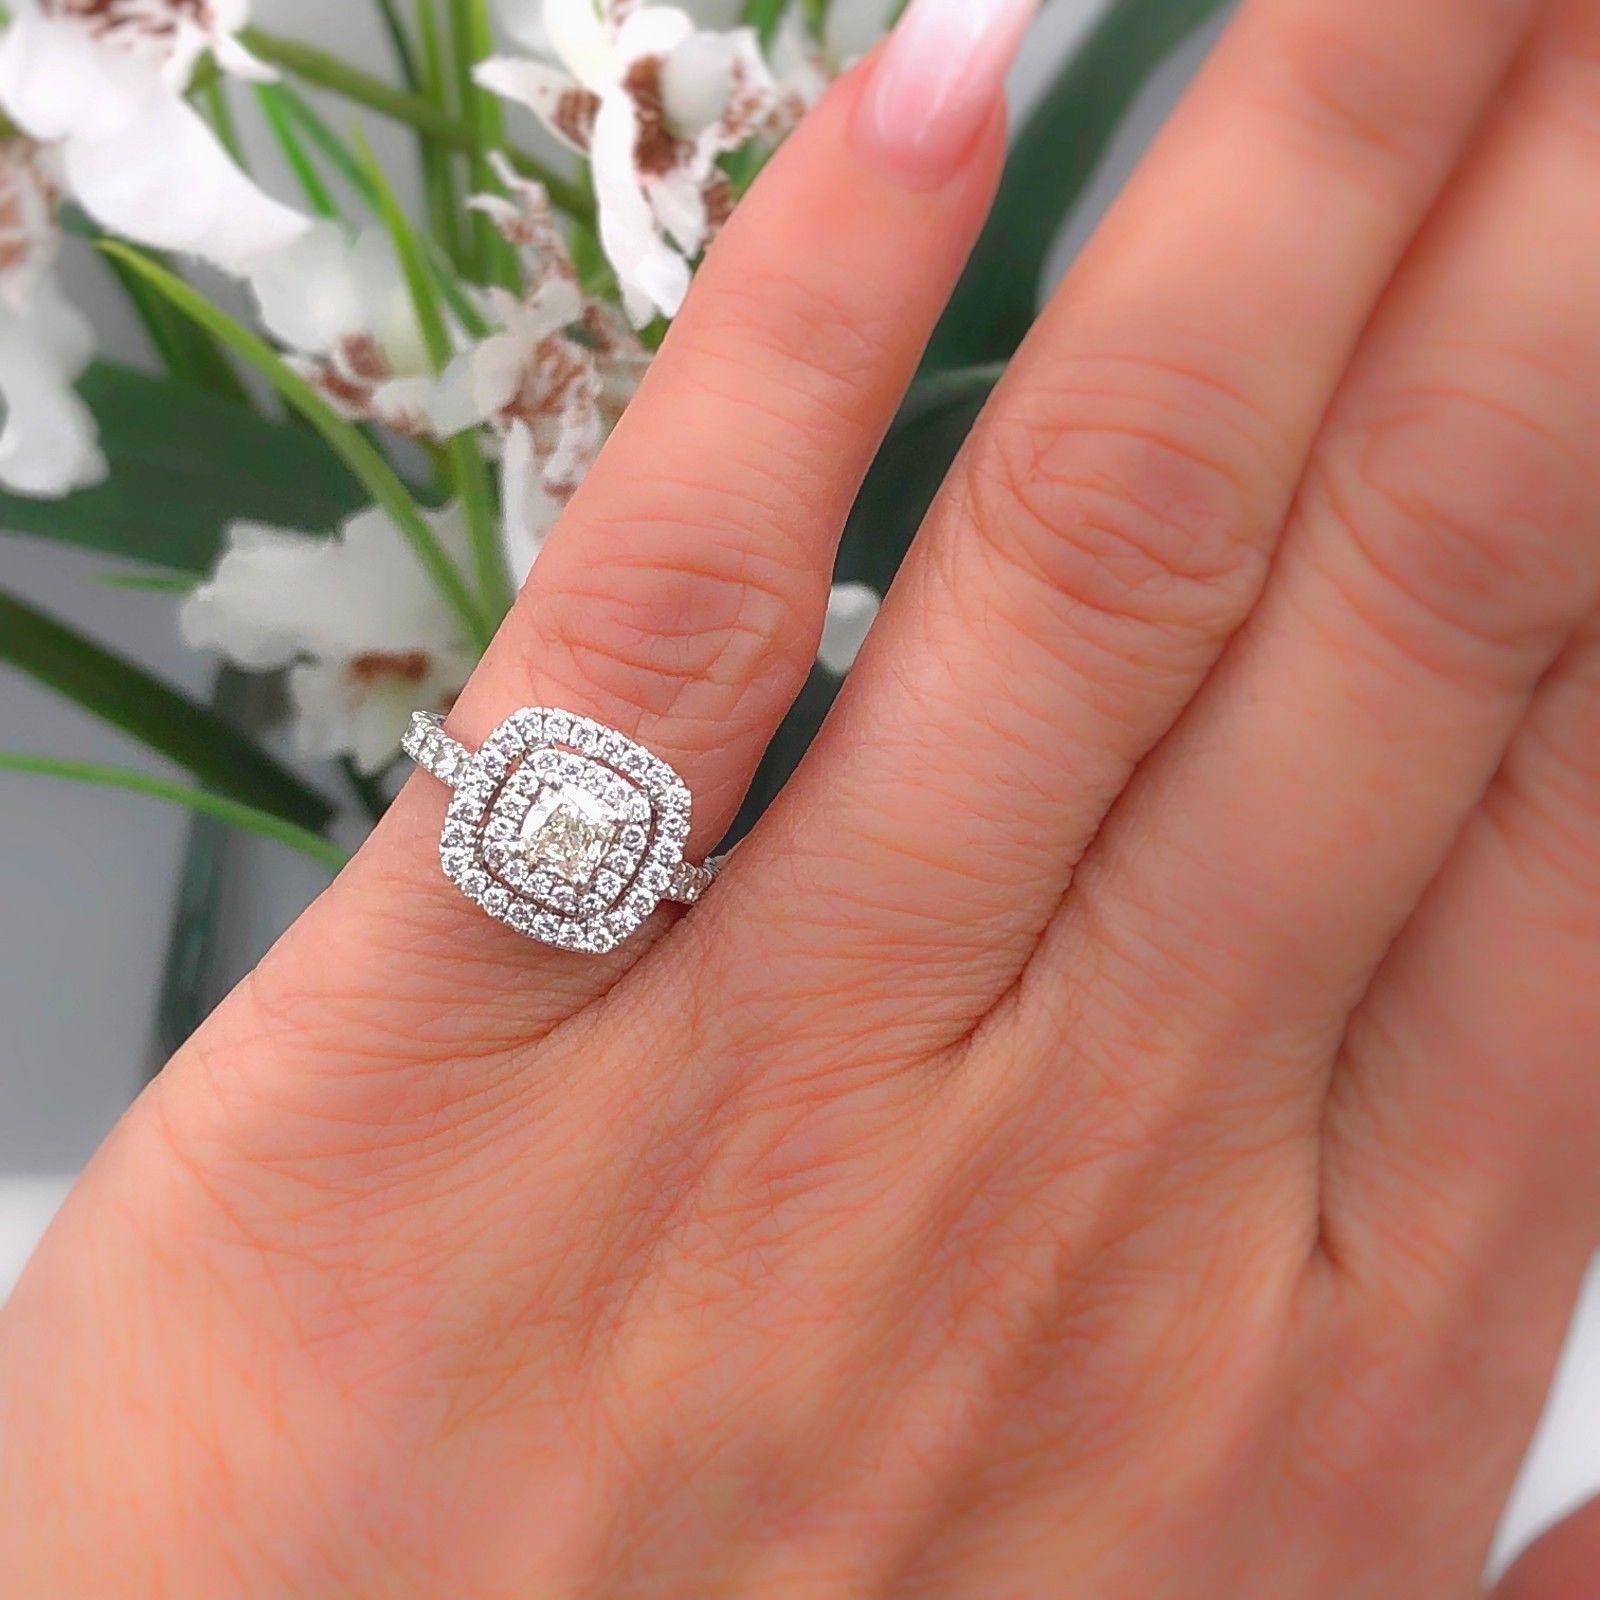 NEIL LANE BRIDAL COLLECTION
Style:  Double Halo Pave Diamond Engagement Ring
Item Number:  940285416
Metal:  14KT White Gold
Size:  3.75 - Sizable
Total Carat Weight:  1.125 TCW
Center Diamond Shape:  Cushion Cut 0.50 CTS
Diamond Color & Clarity:  I